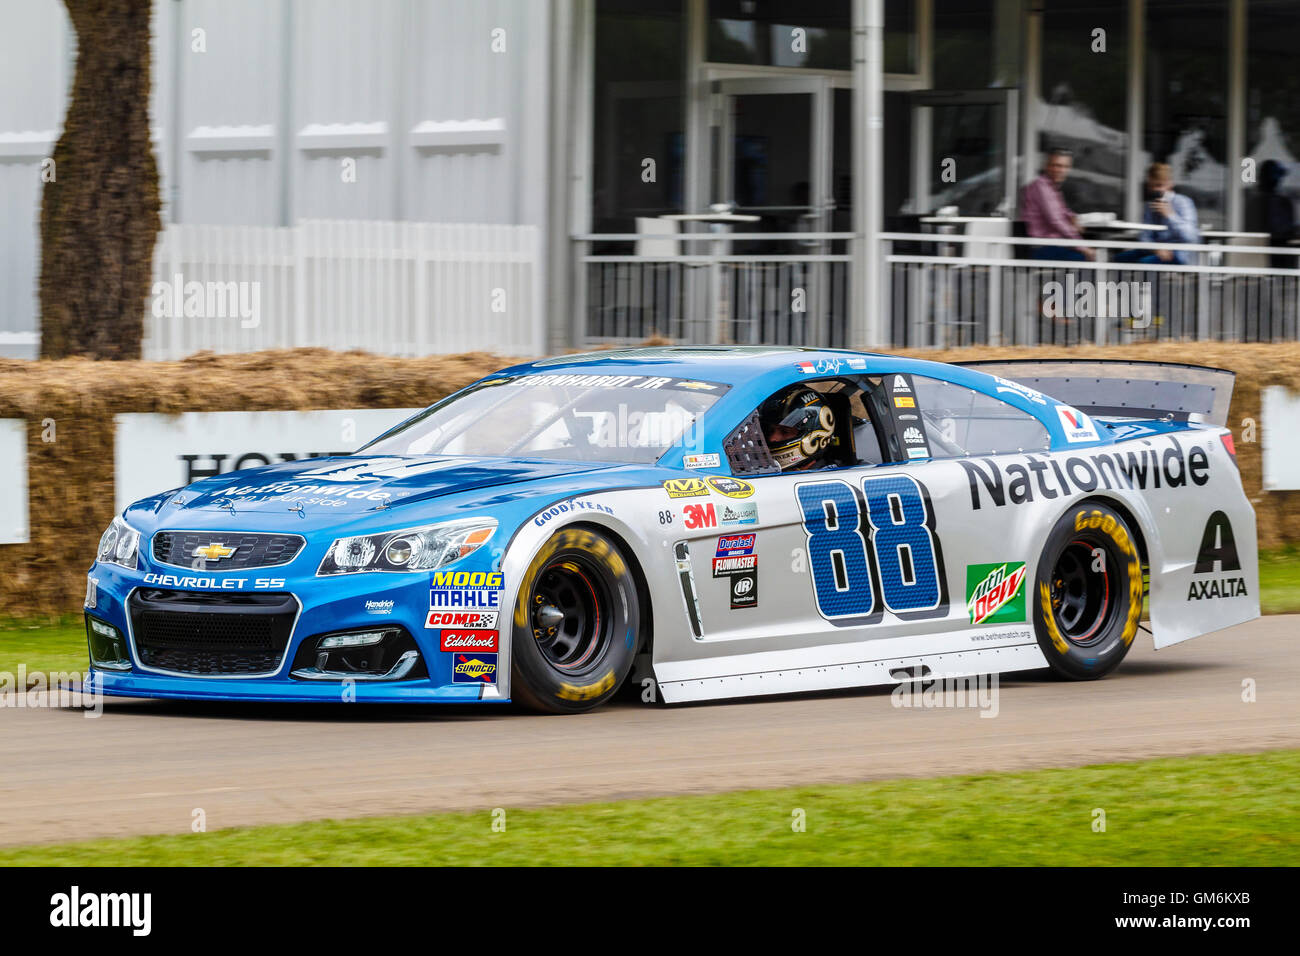 2016-chevrolet-ss-nascar-with-driver-will-spencer-at-the-2016-goodwood-GM6KXB.jpg